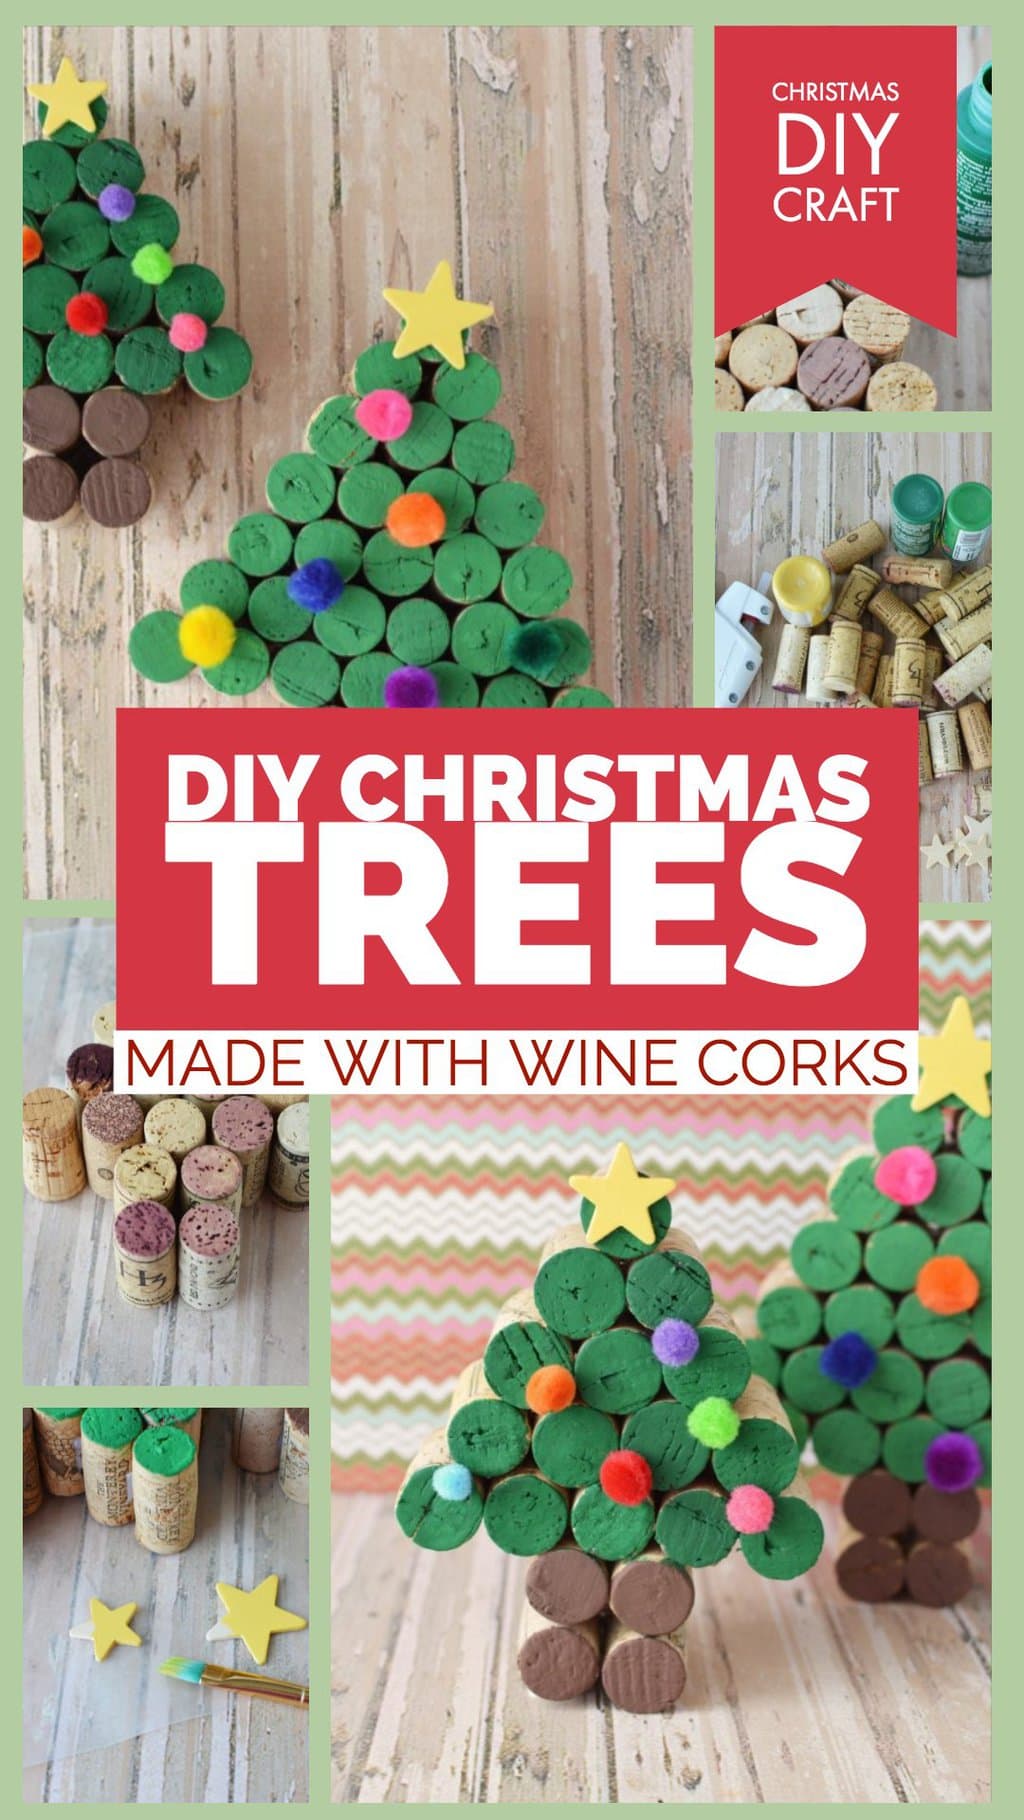 Wine Cork Craft, DIY Wine Cork Craft for Christmas, Christmas Trees made out of wine corks